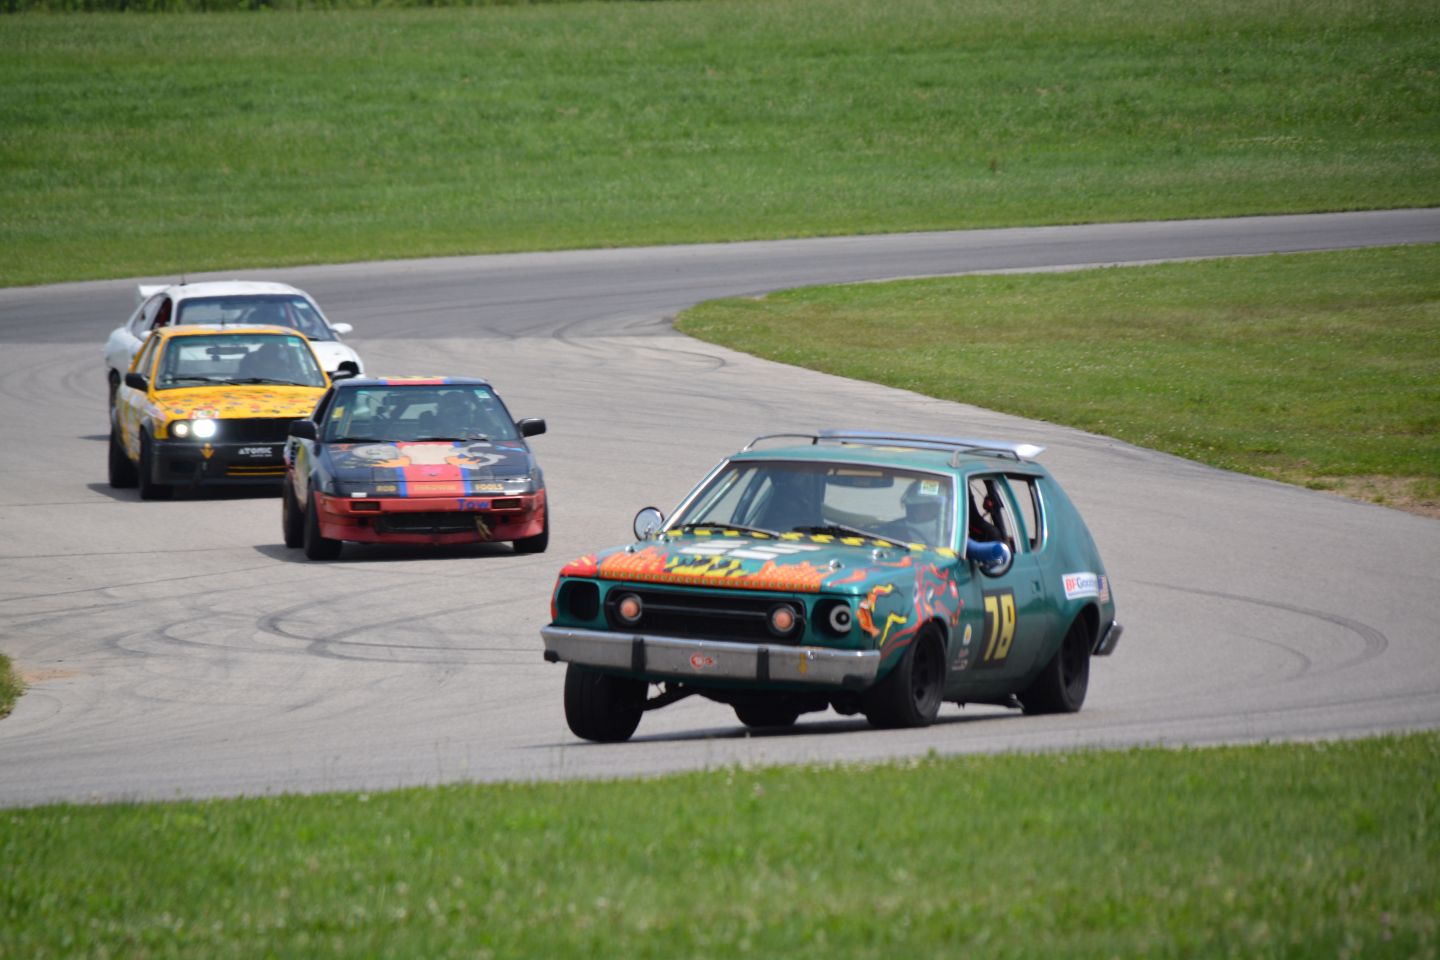 Race Dates It's Your 2020 24 Hours of Lemons Schedule! 24 Hours of